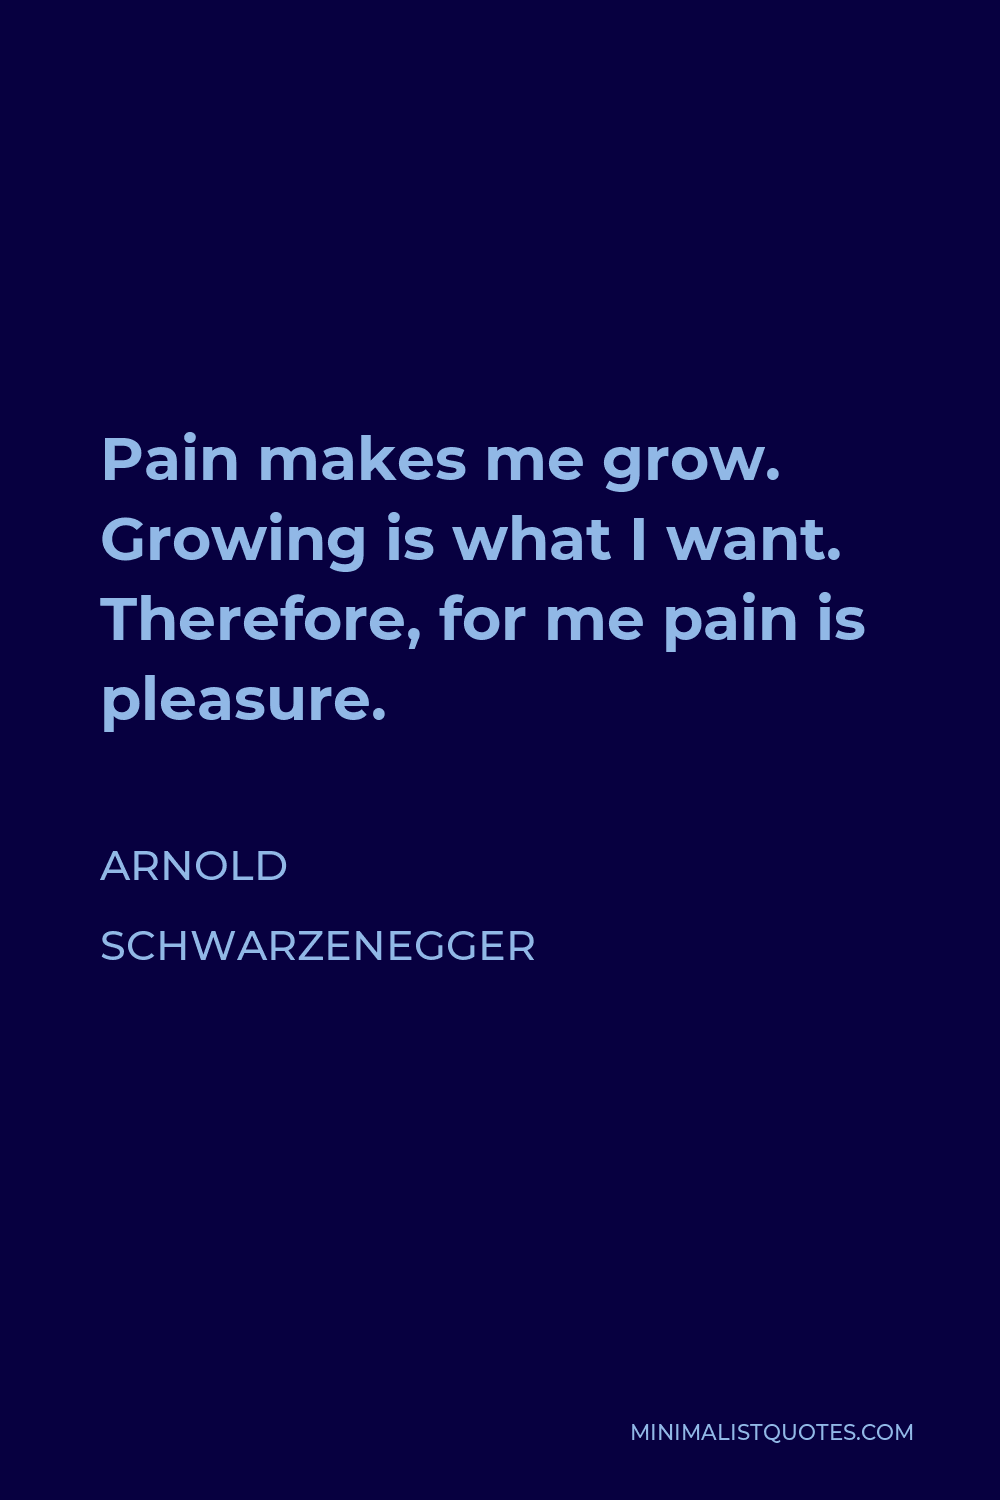 Arnold Schwarzenegger Quote - Pain makes me grow. Growing is what I want. Therefore, for me pain is pleasure.